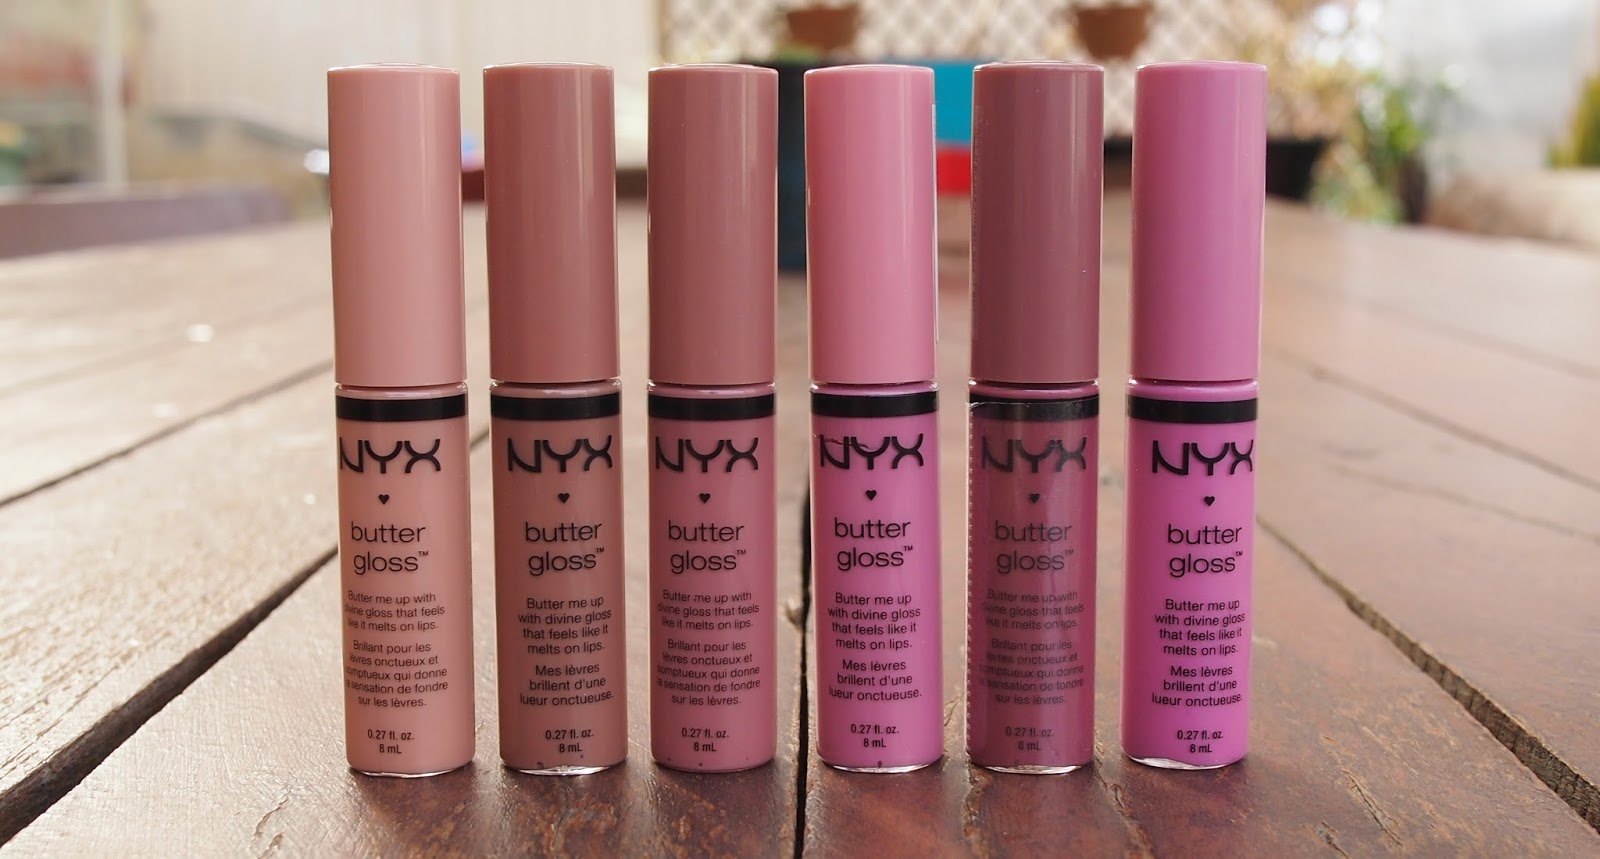 Born To Buy: Nyx Butter Gloss Review And Swatches 2.0 (Updated)